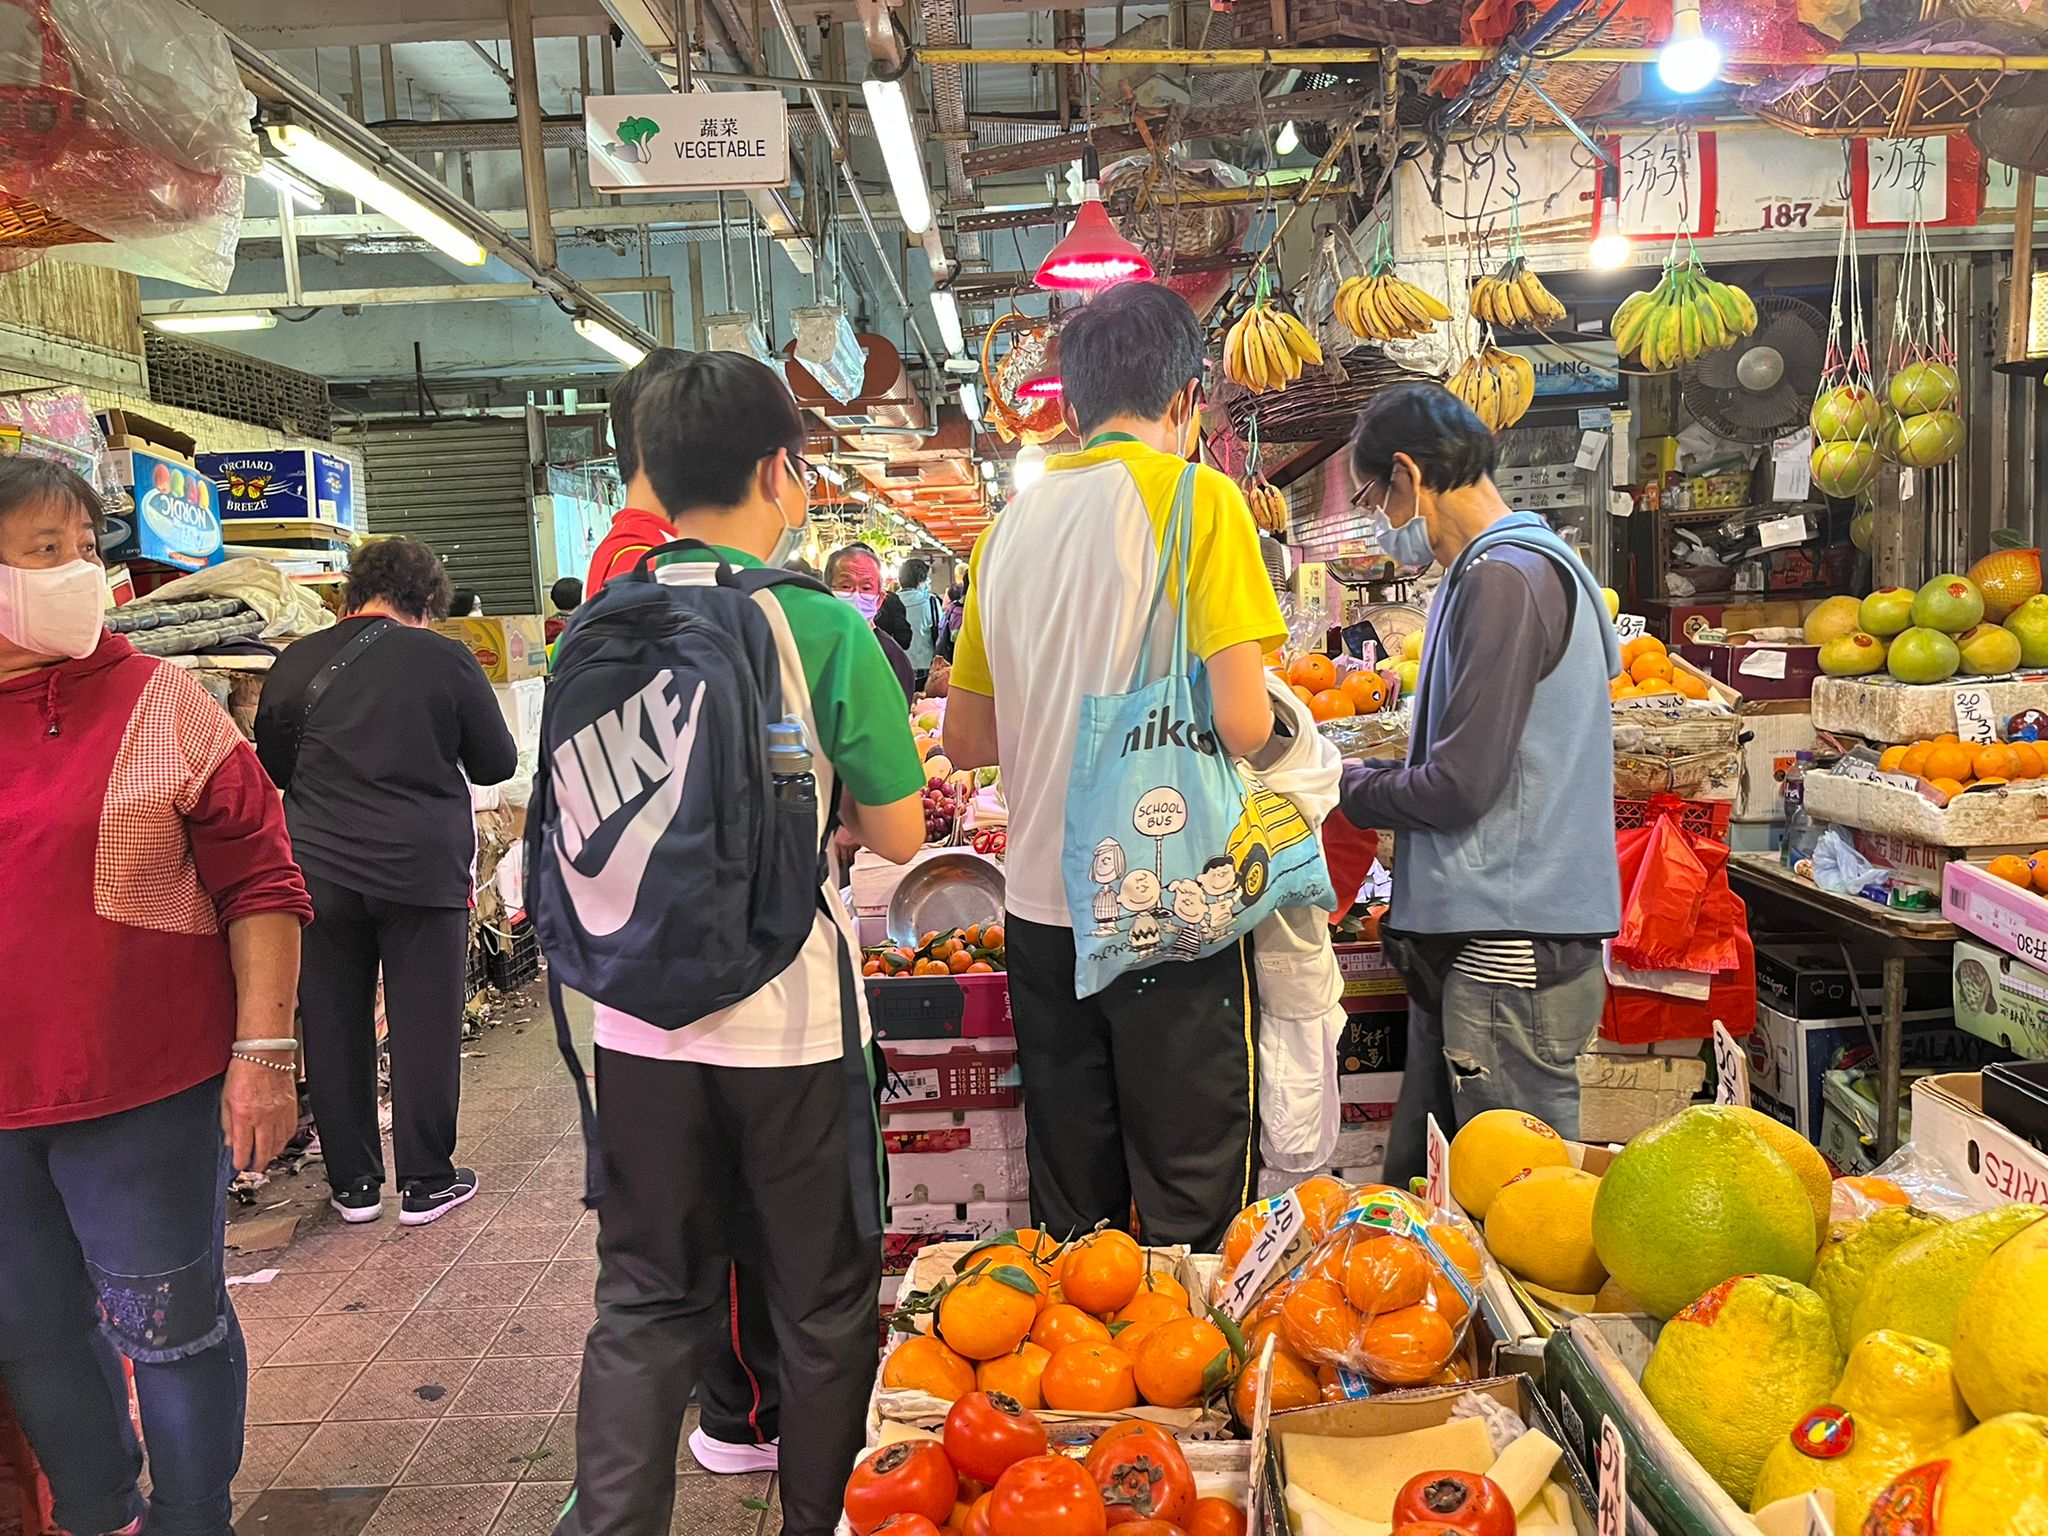 Community visit cum budget meal experiential trip: Secondary school students were participating the program to use $30 to buy a meal for the elder person in need in Shek Kei Mei Market